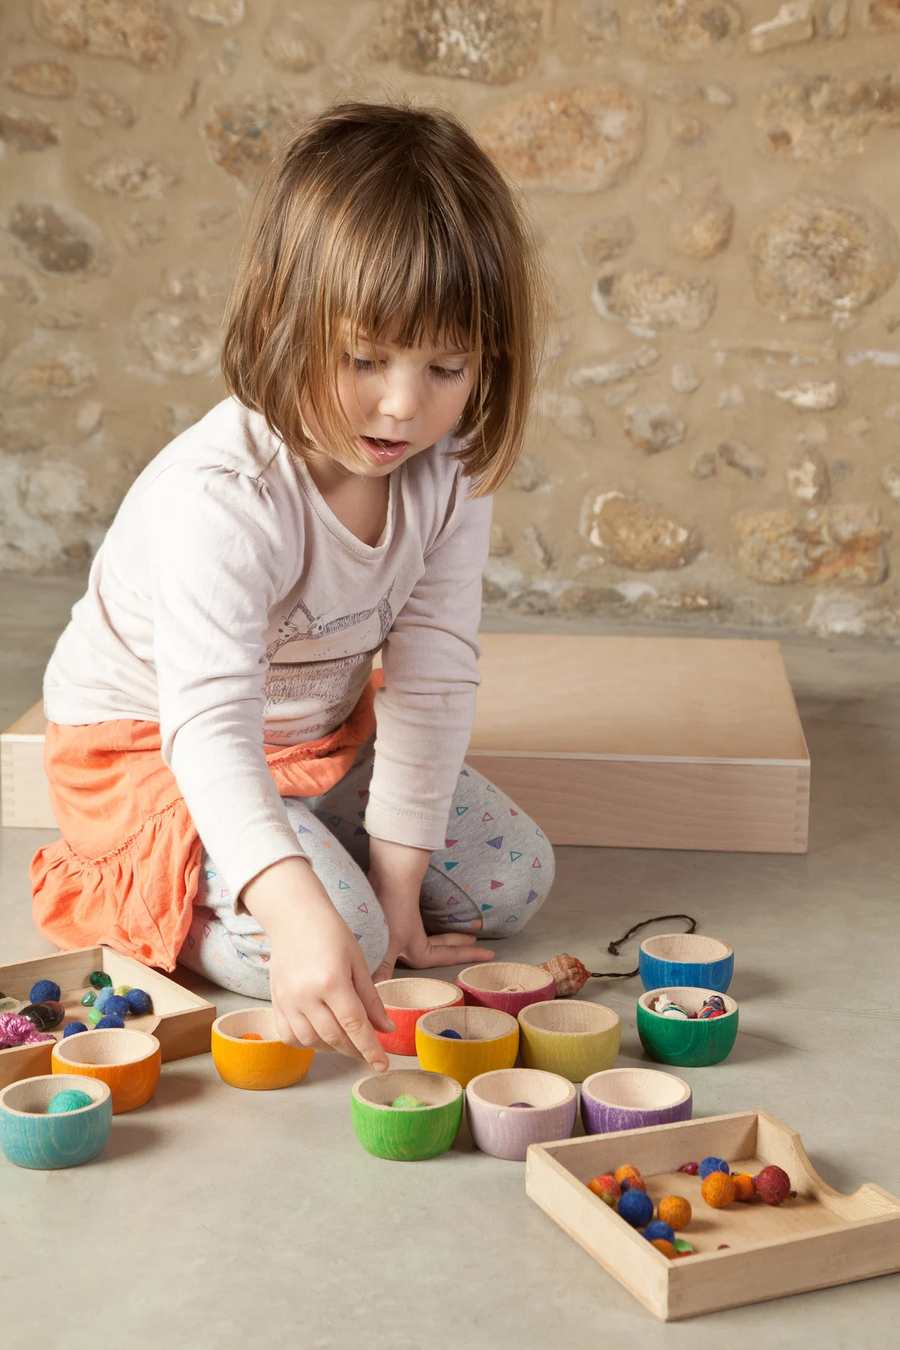 Grapat 12 Rainbow Coloured Bowls - Wooden Toys